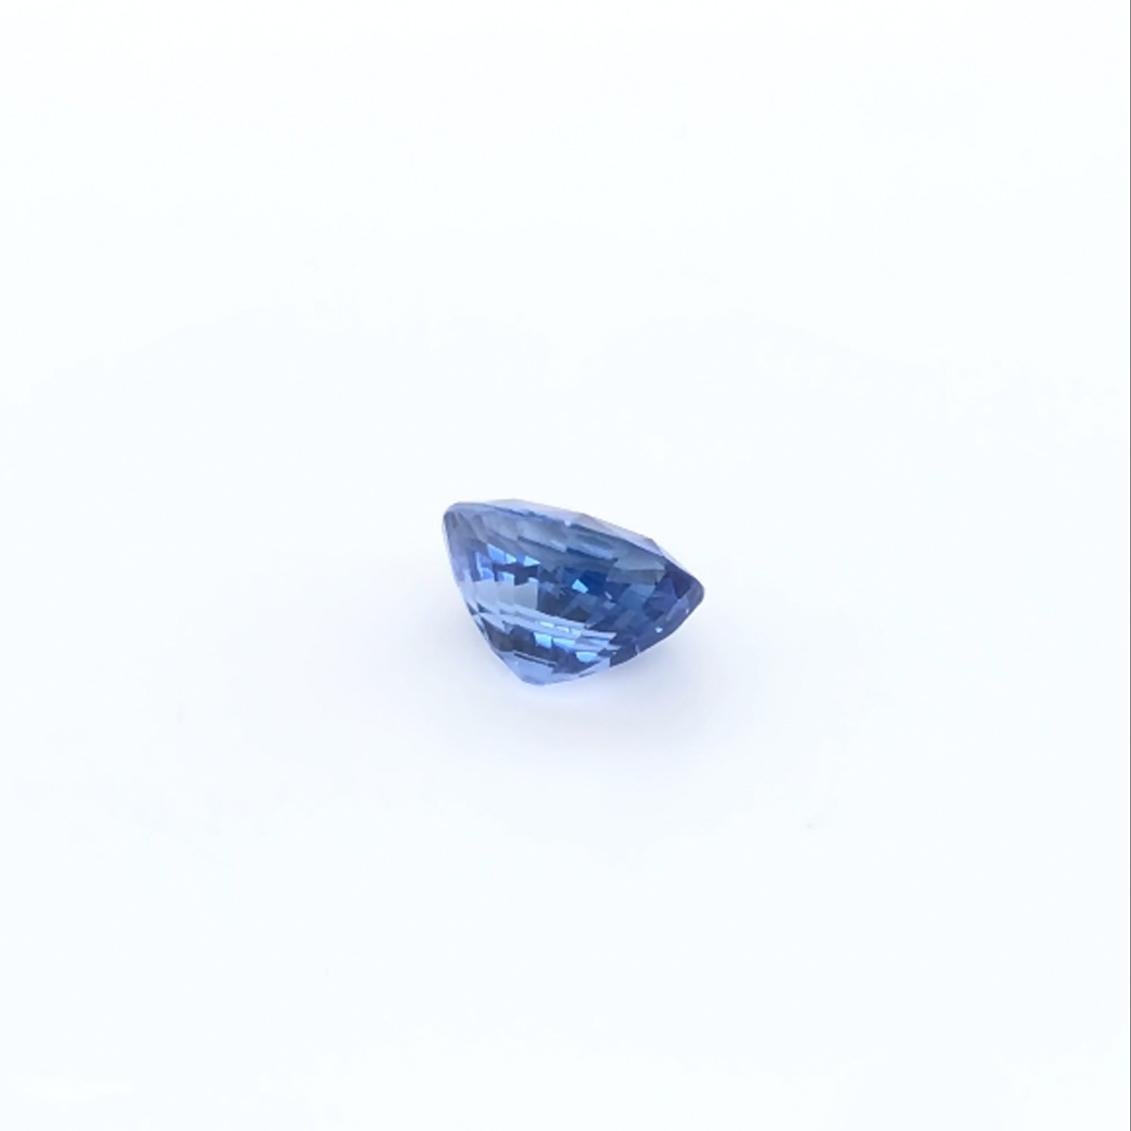 Women's or Men's GIA and Bellerophon Certified 4.23ct Blue Sapphire Natural Gemstone For Sale